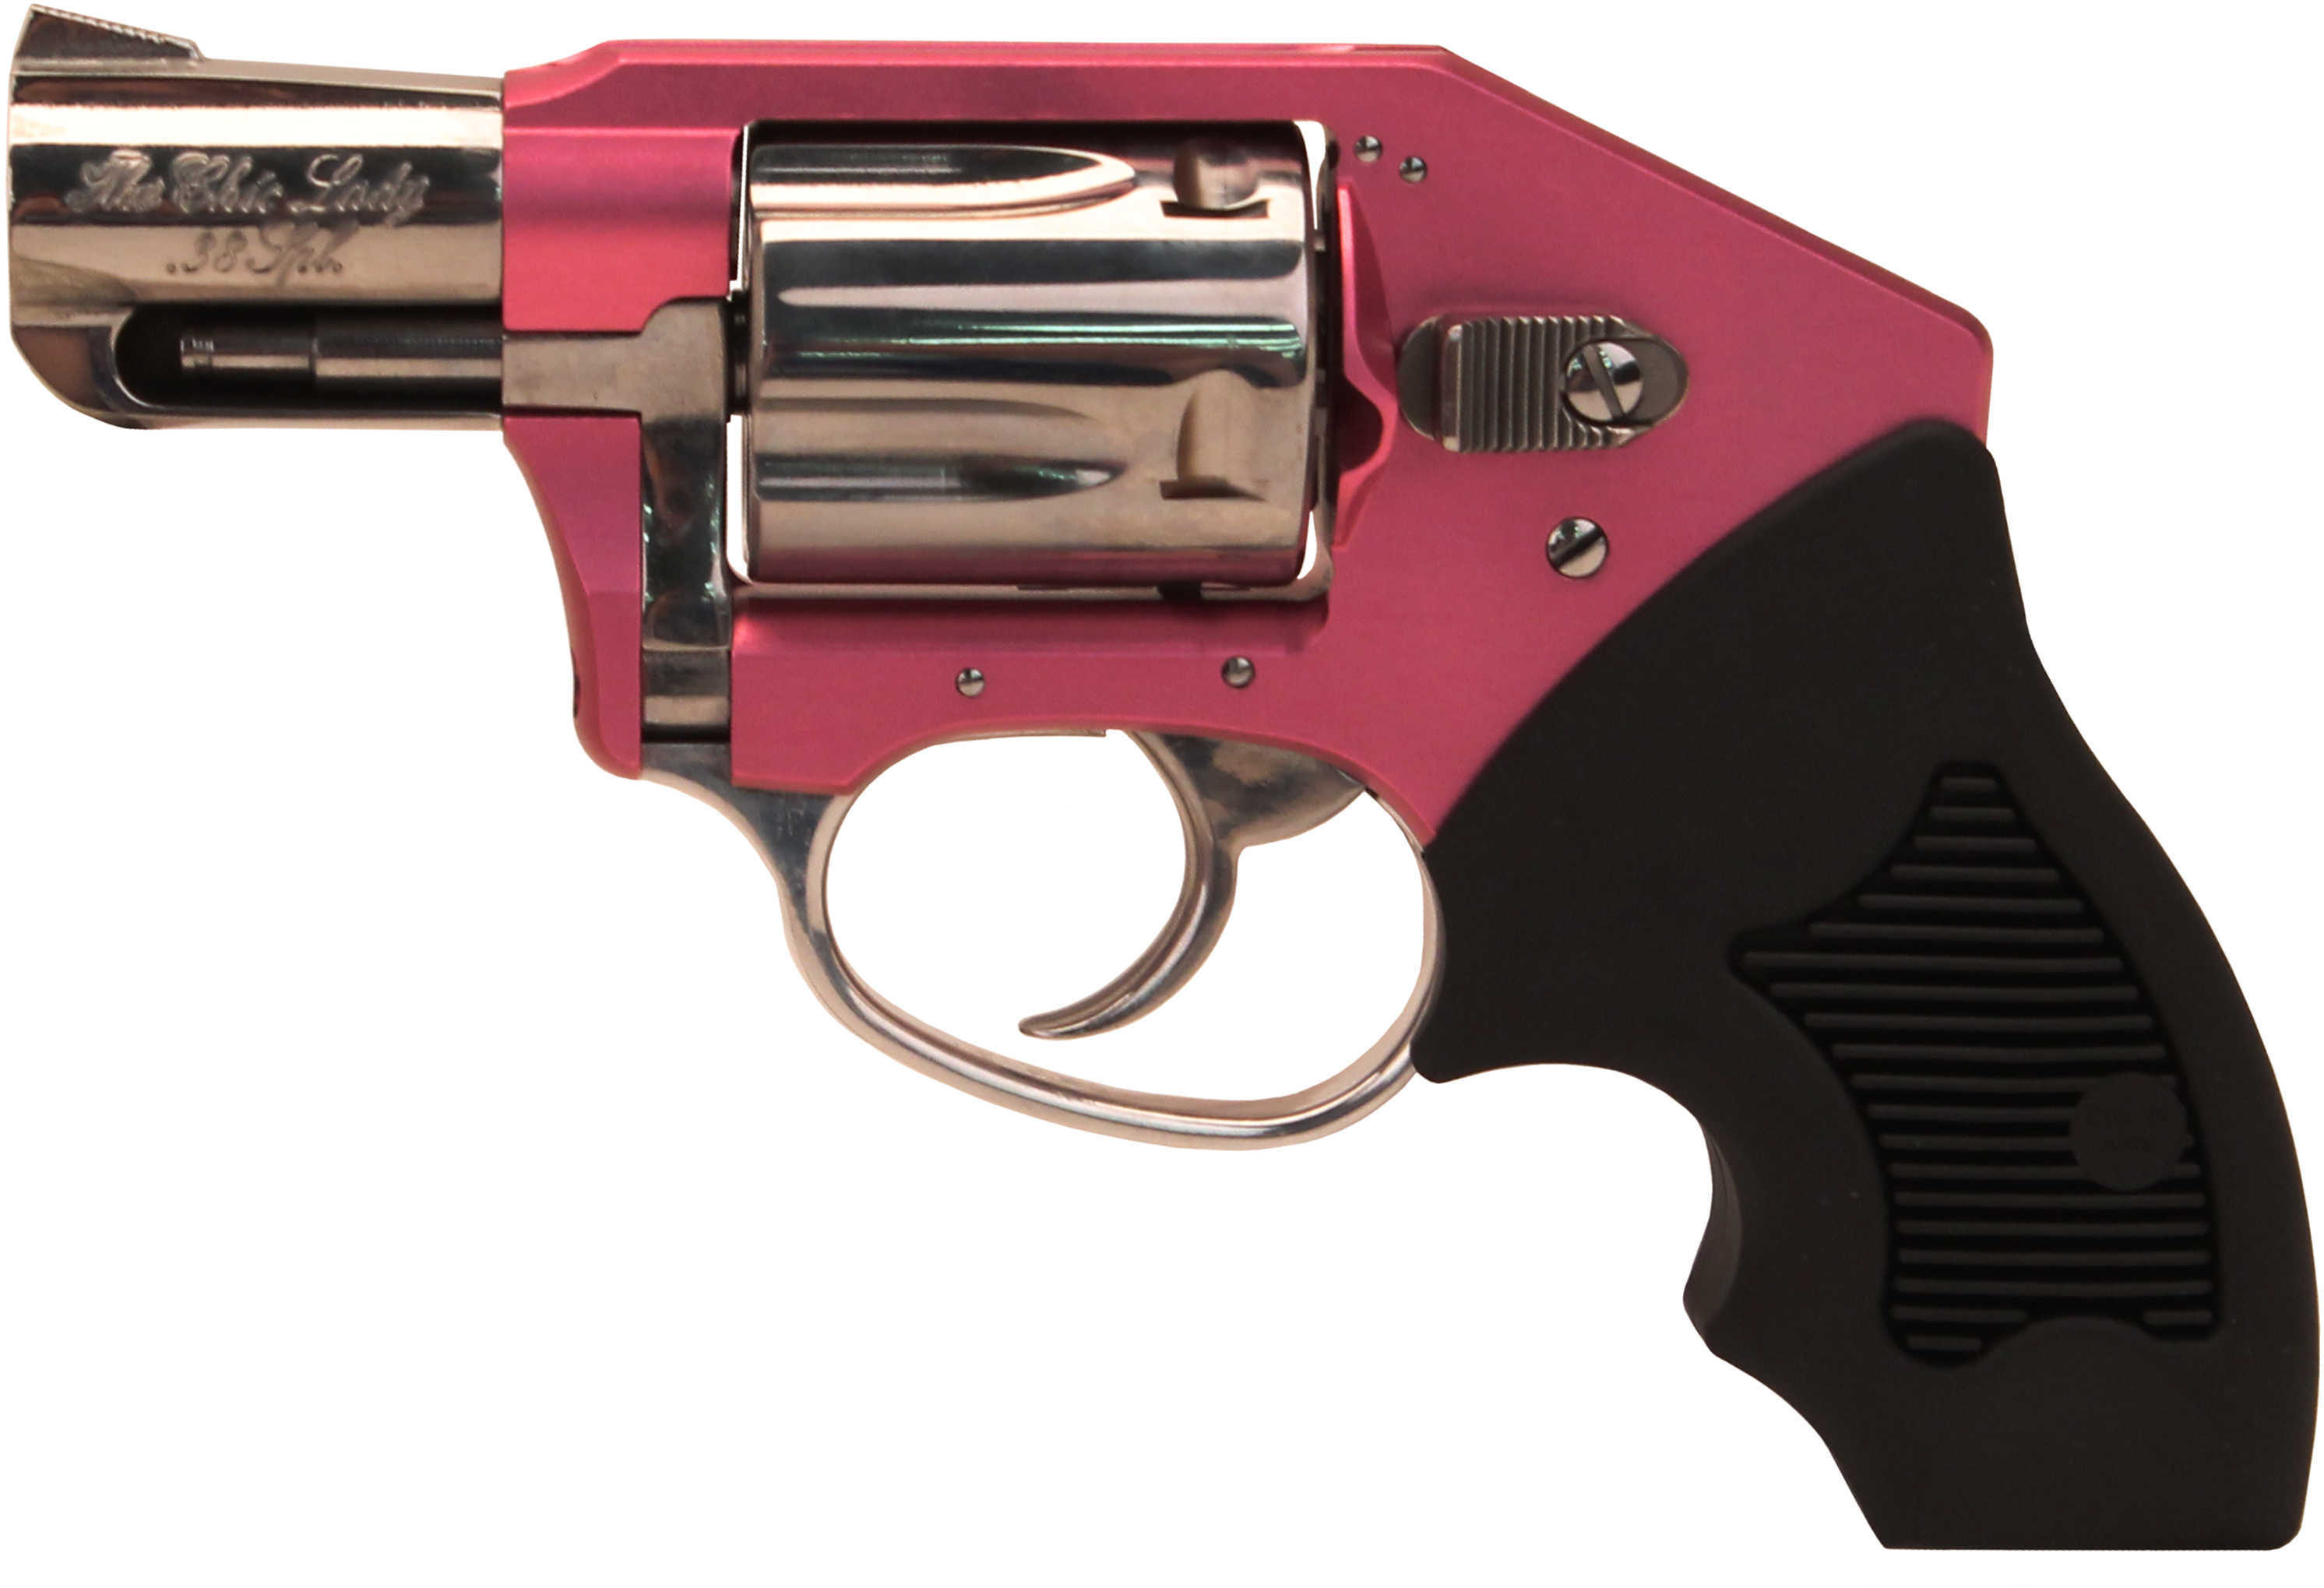 Charter Arms 38 Special Undercover Lite Chic Lady 5 Round 2" Barrel DAO Pink/Hi-Polish Stainless Steel Revolver 53852